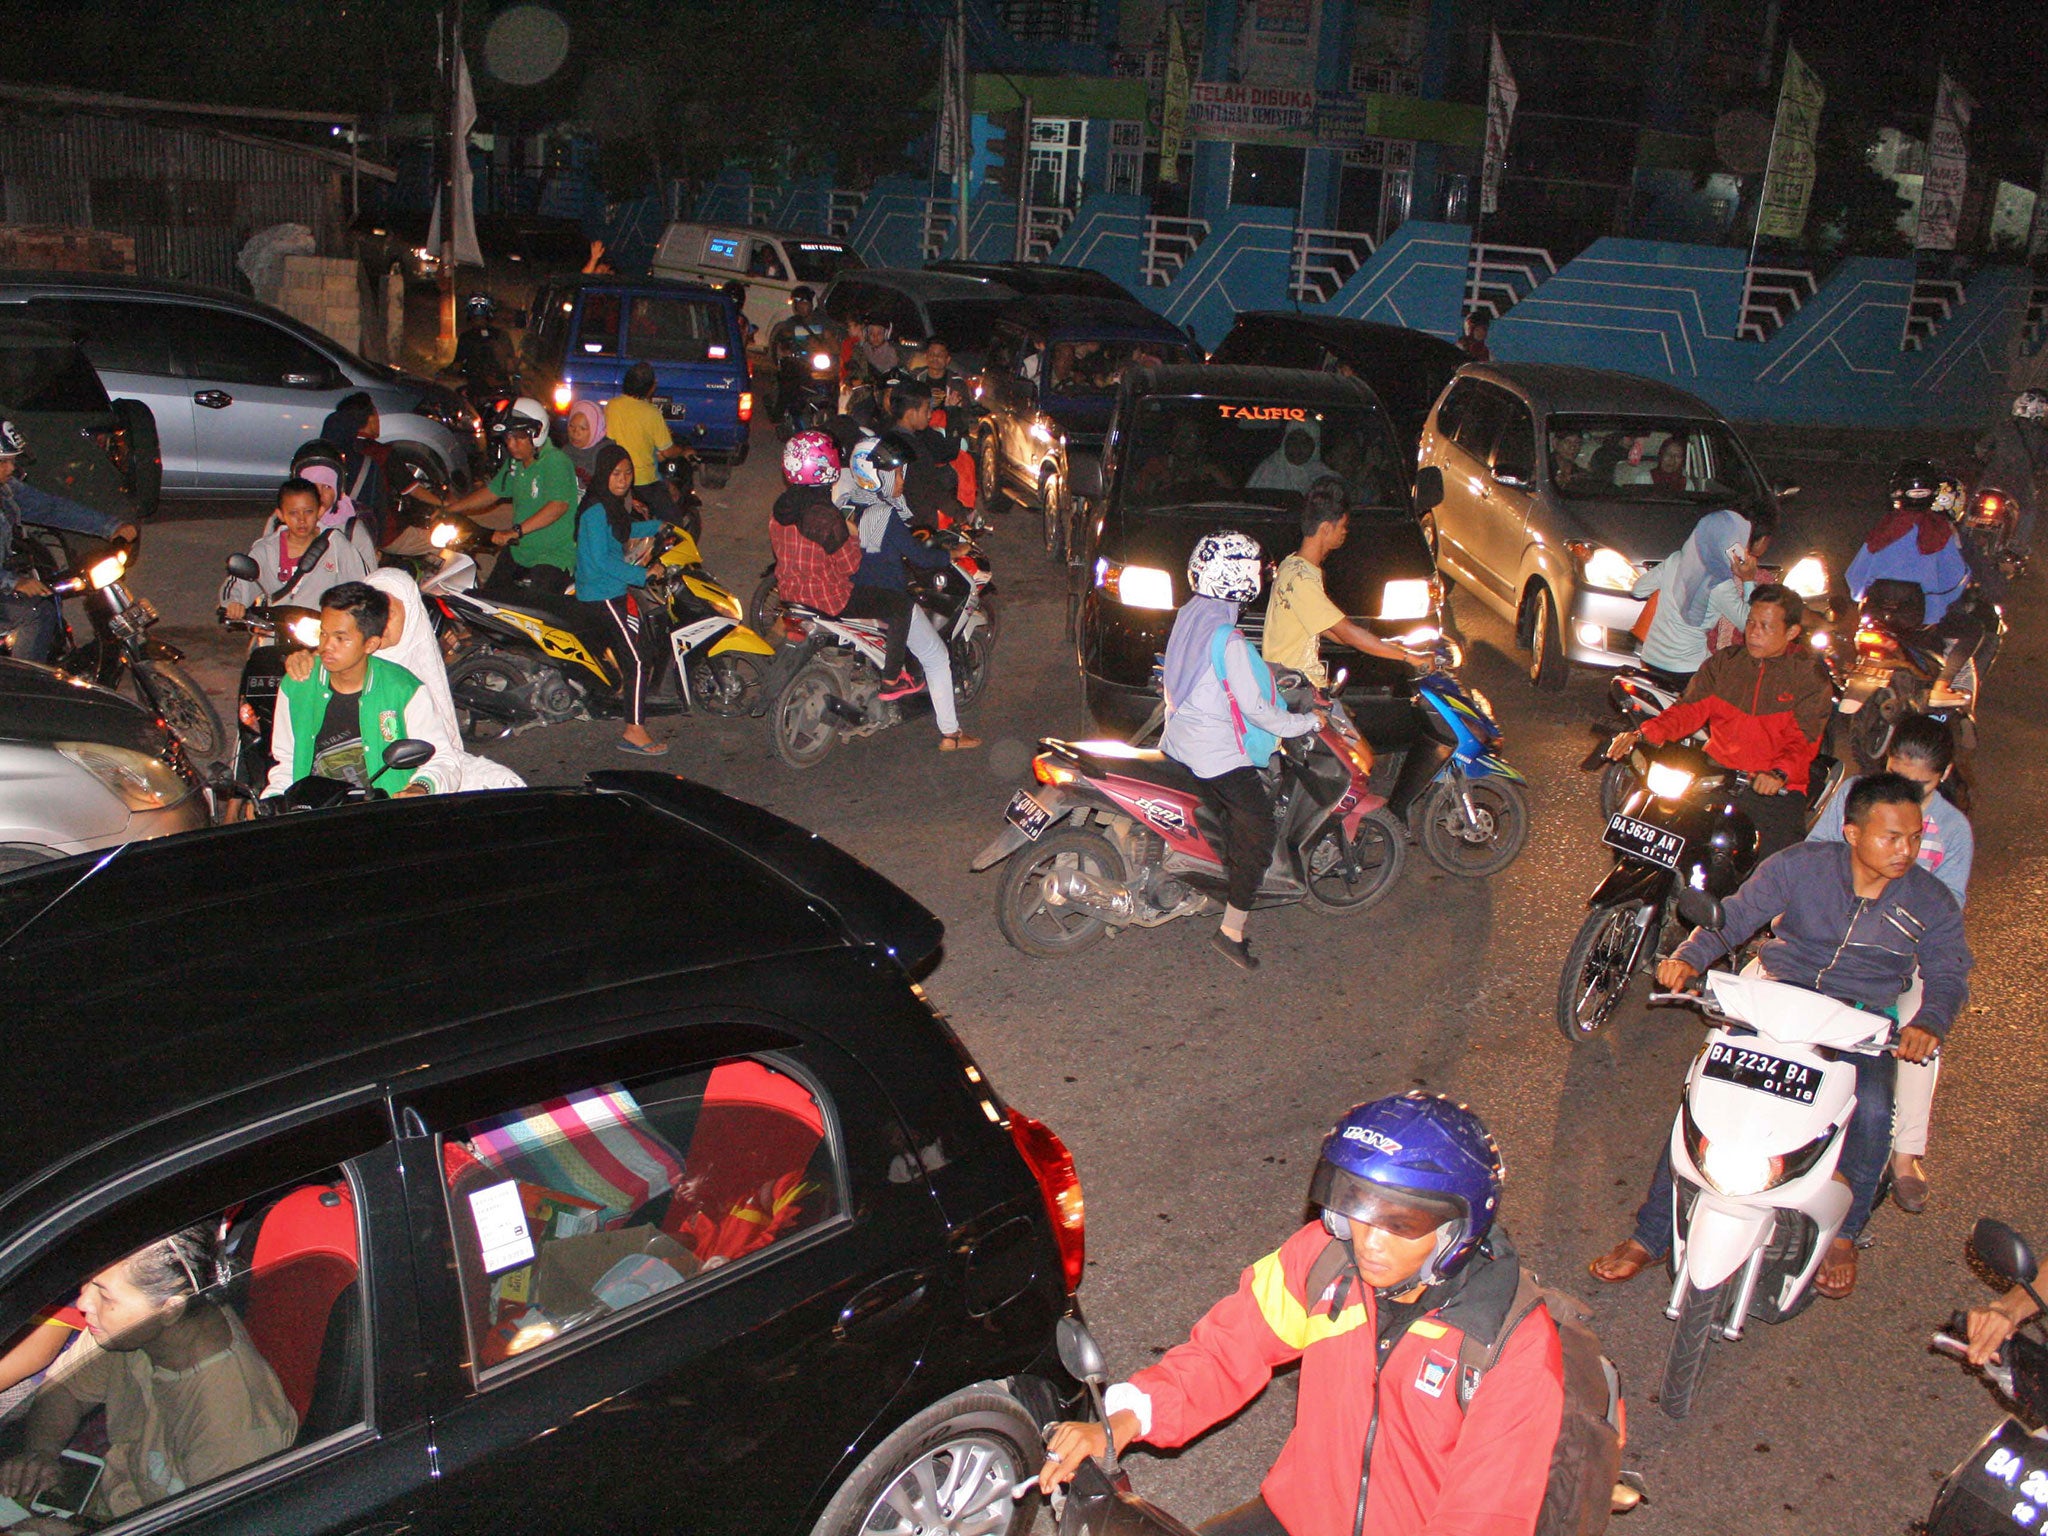 Some of the chaotic scenes as people in Padang, Sumatra, fled to higher ground could have been avoided